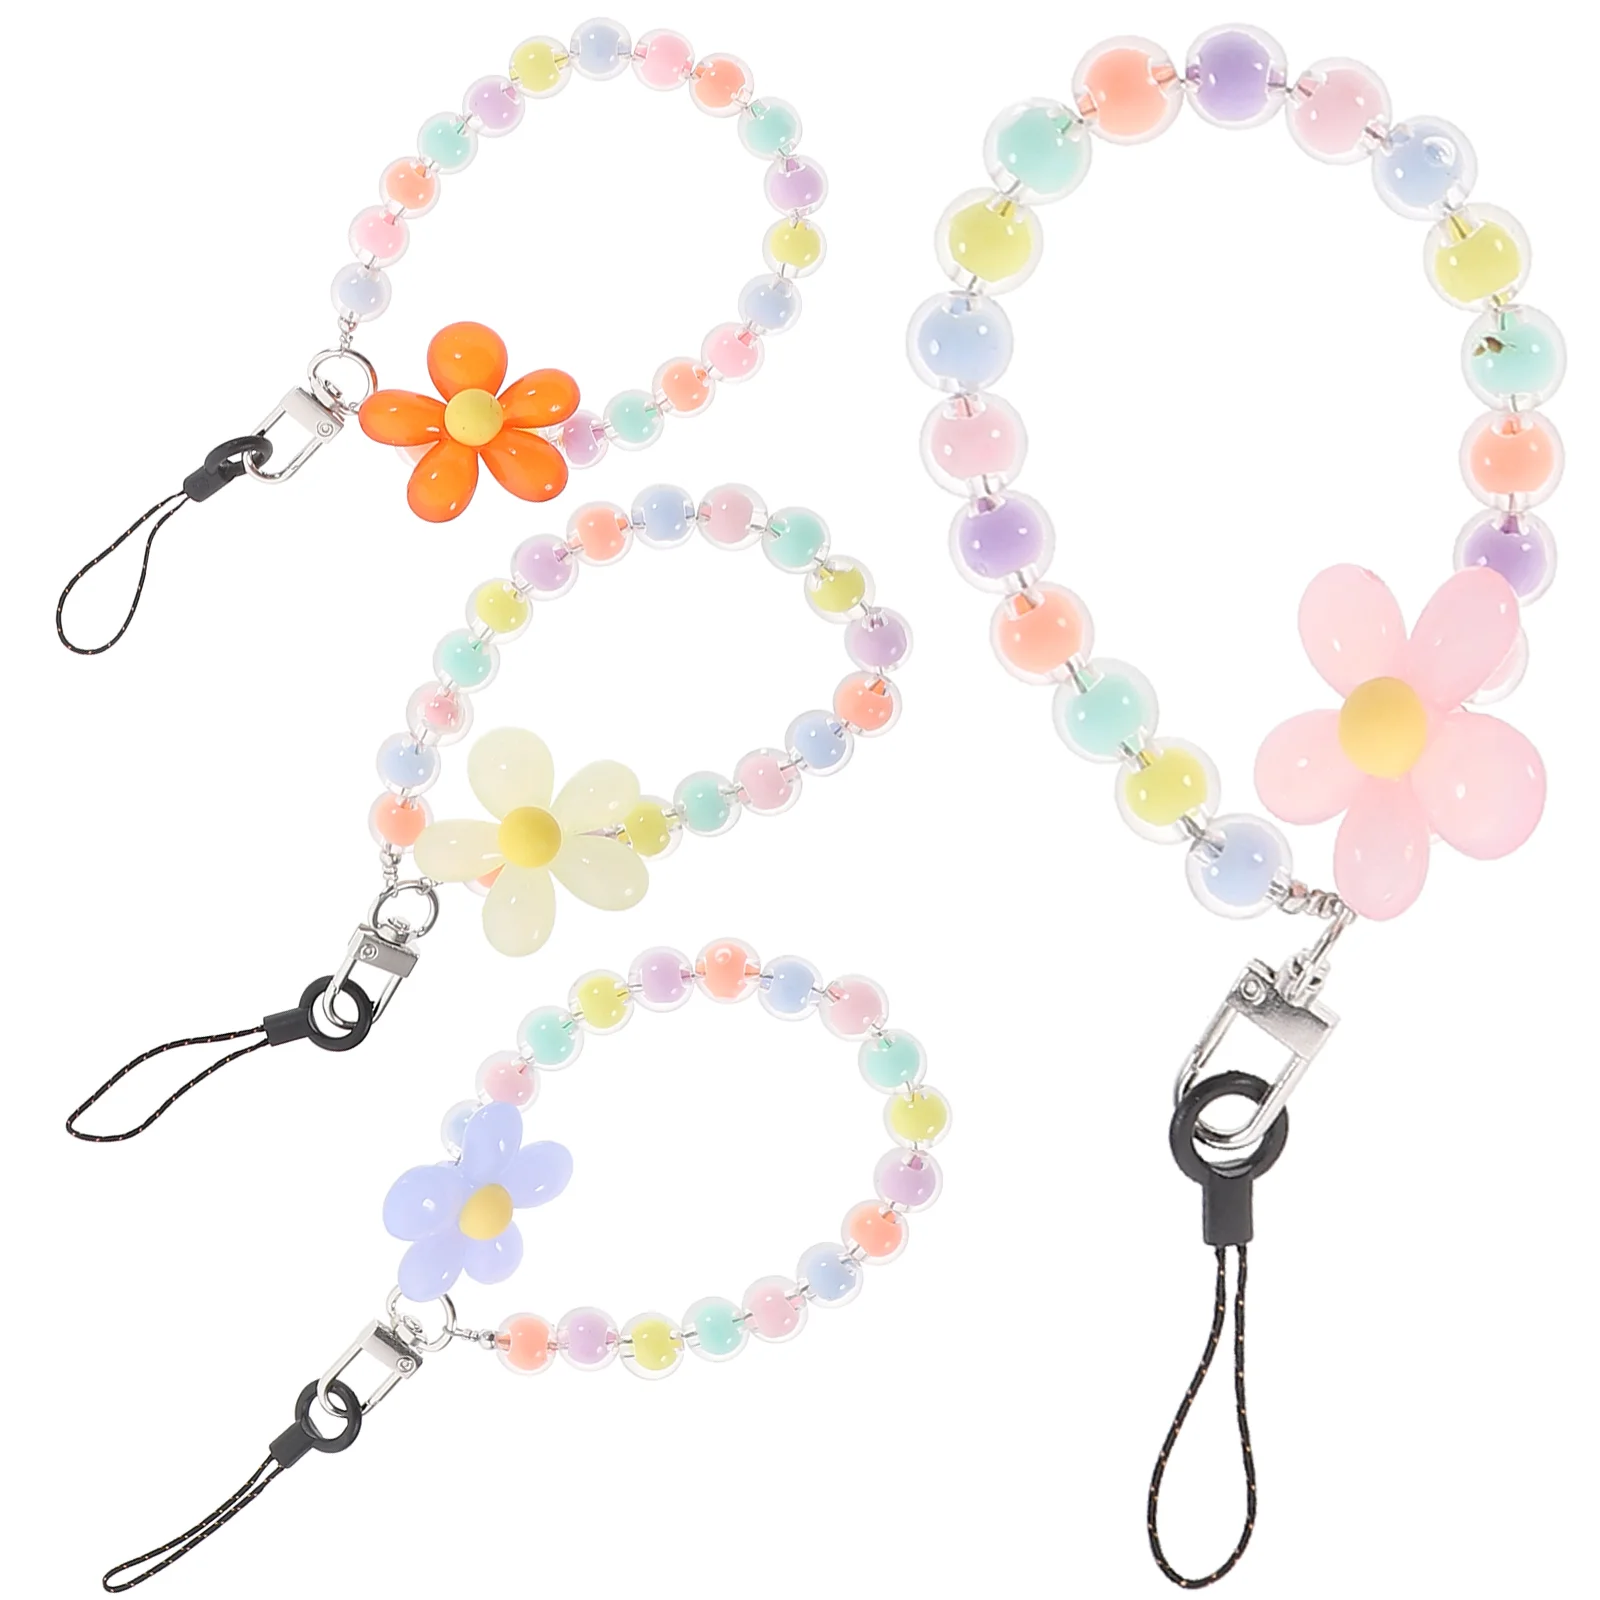 

Phone Accessories Charm Lanyard Strap Cellphone Cute Beaded Chain Decor Charms Wristlet